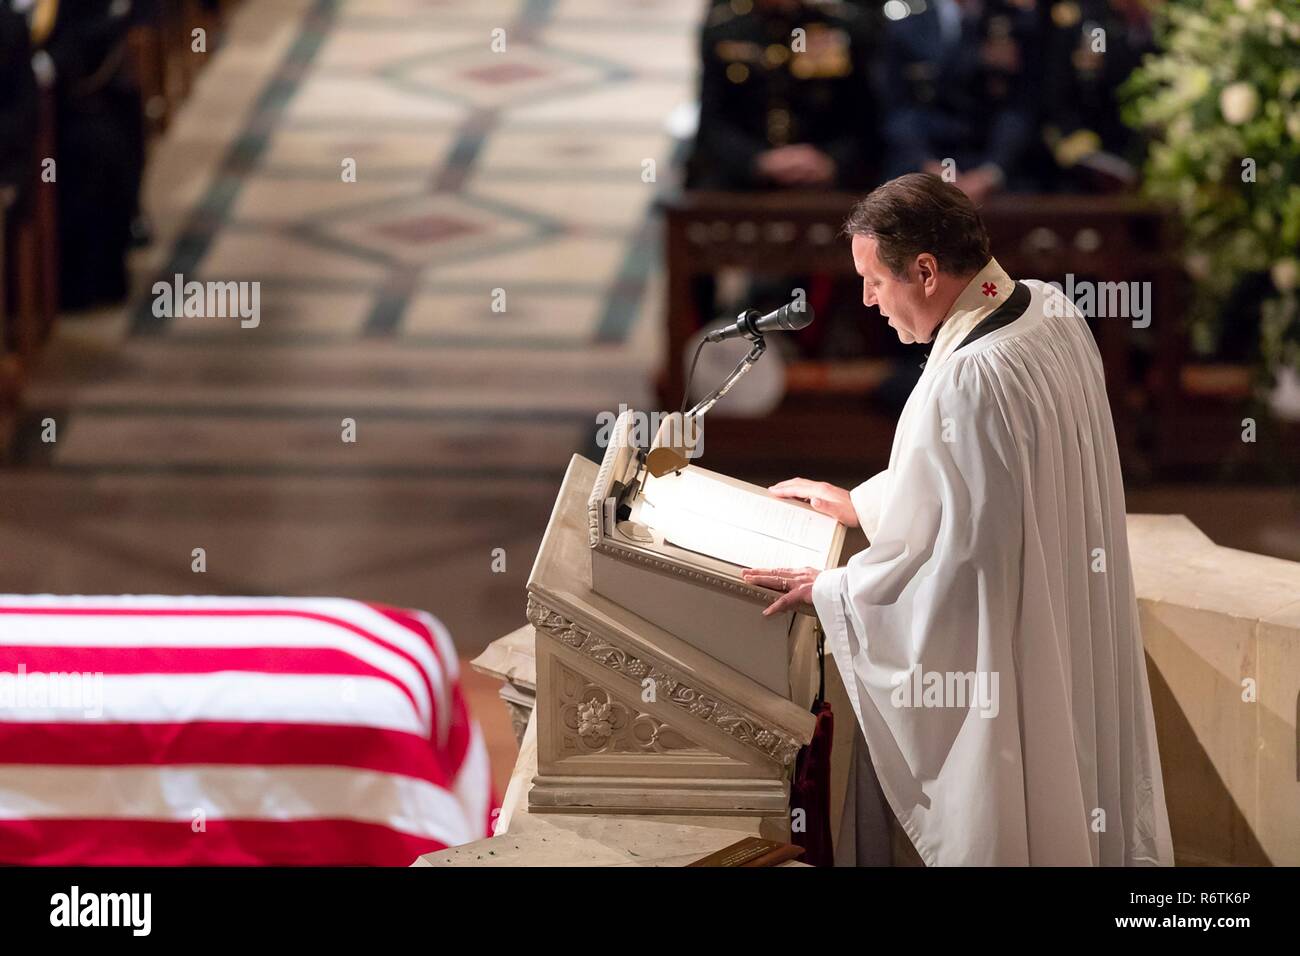 Rev. Dr. Russell Jones Levenson, Jr., the Bush family pastor, delivers the homily at the State Funeral for former President George H.W. Bush at the National Cathedral December 5, 2018 in Washington, DC. Bush, the 41st President, died in his Houston home at age 94. Stock Photo